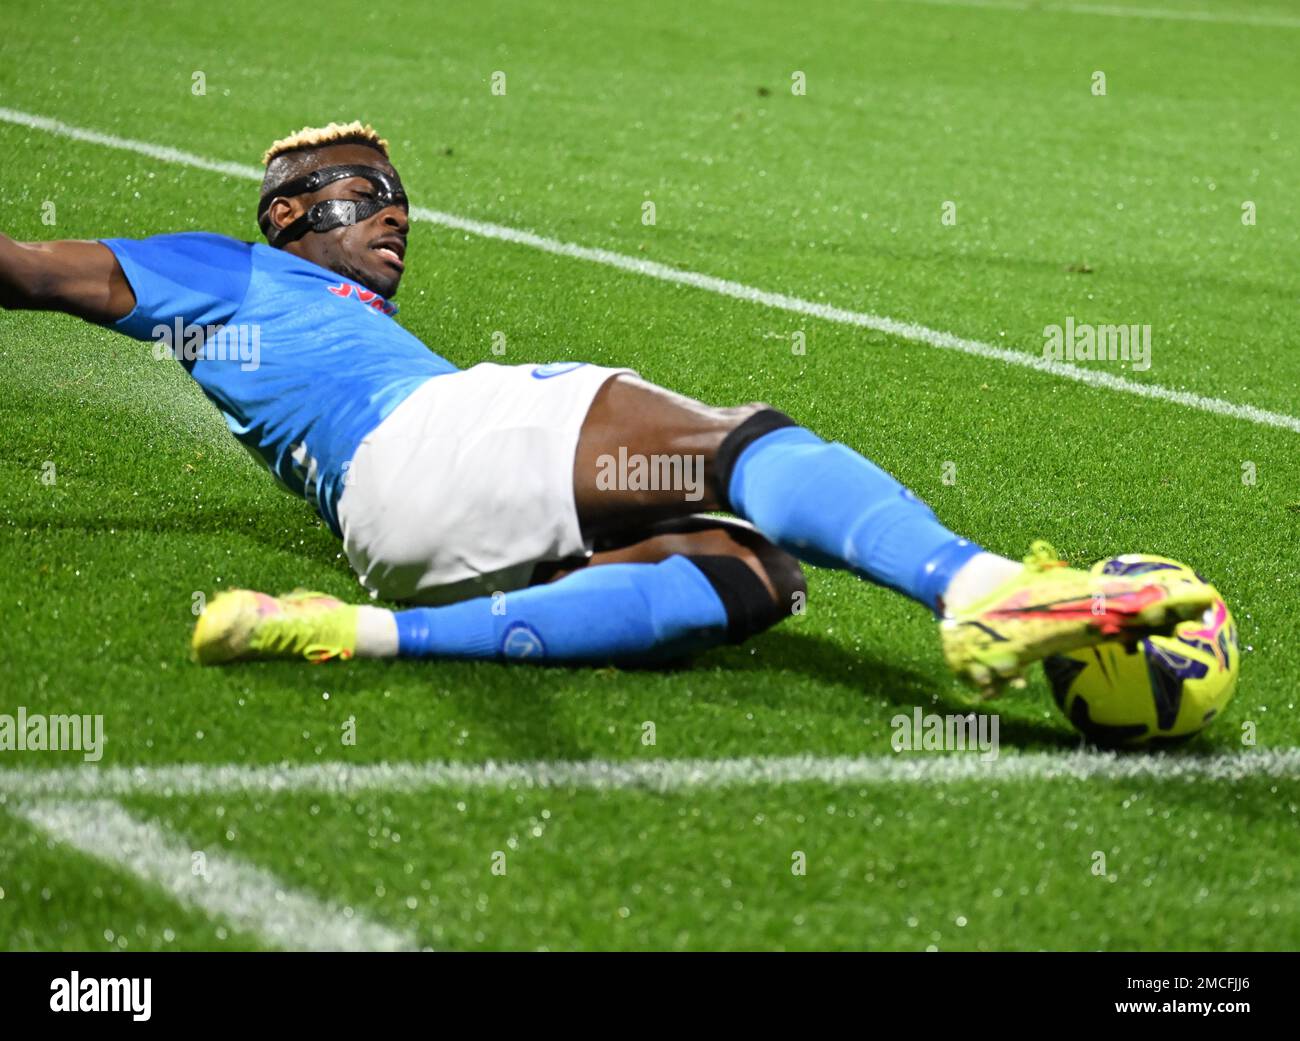 Salerno, Italy. 21st Jan, 2023. Napoli's Victor Osimhen is in action during a Serie A football match between Napoli and Salernitana in Salerno, Italy, Jan. 21, 2023. Credit: Alberto Lingria/Xinhua/Alamy Live News Stock Photo